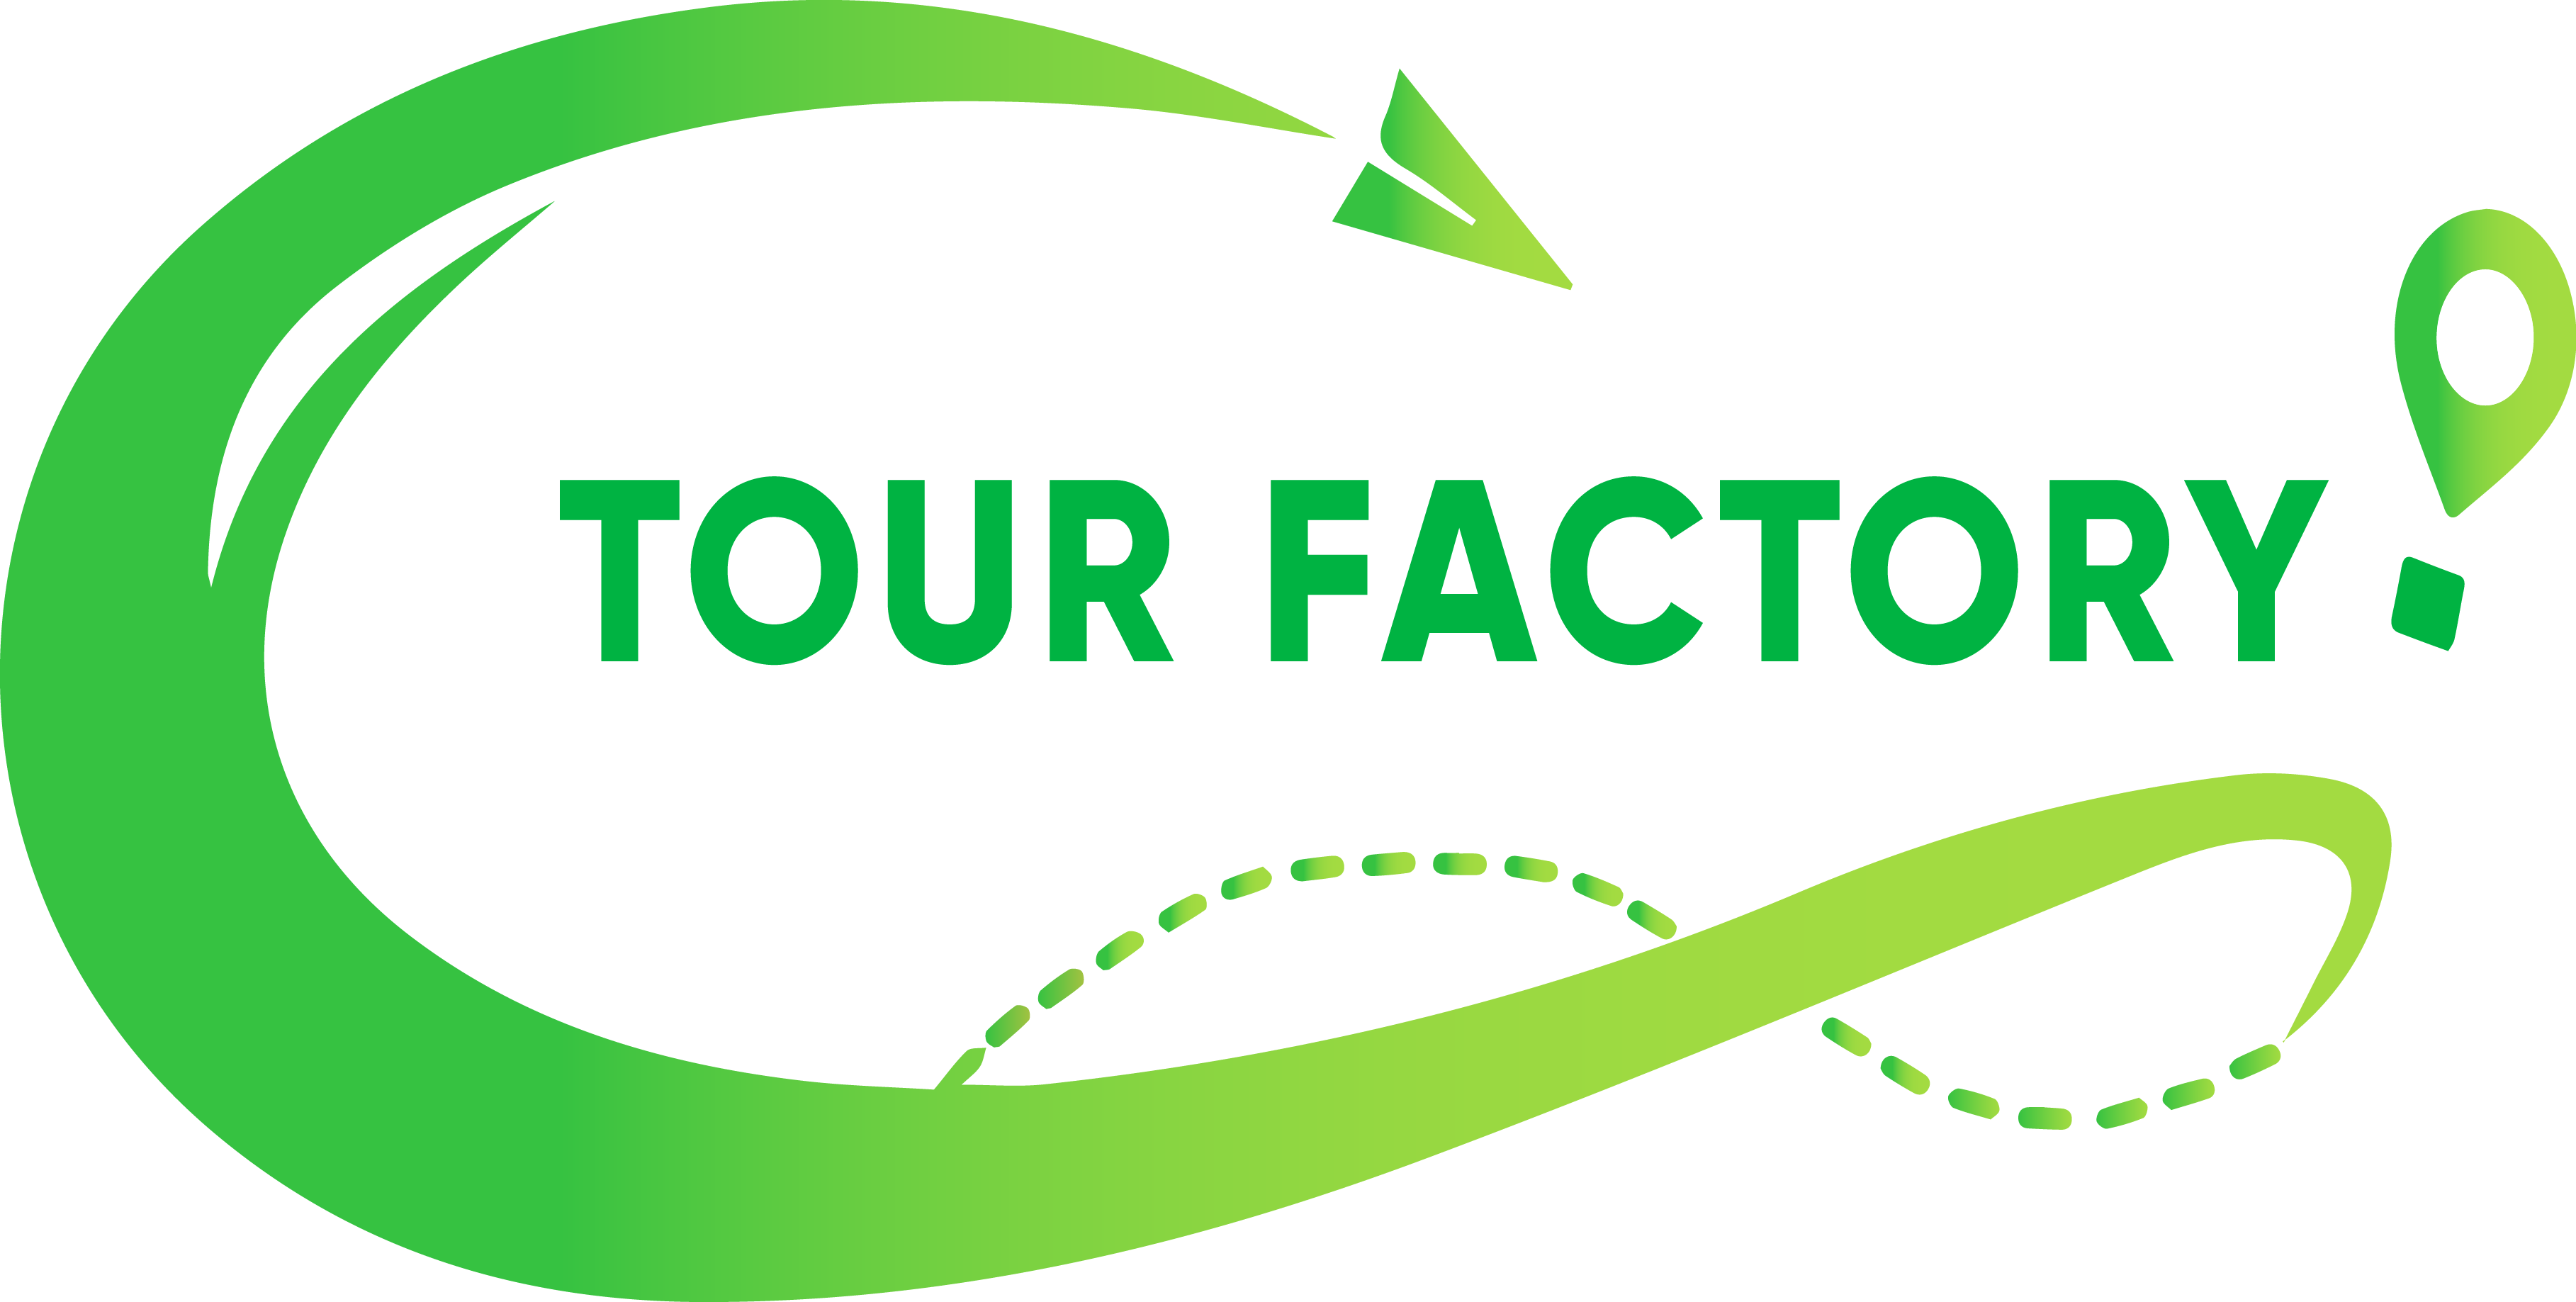 the tour factory